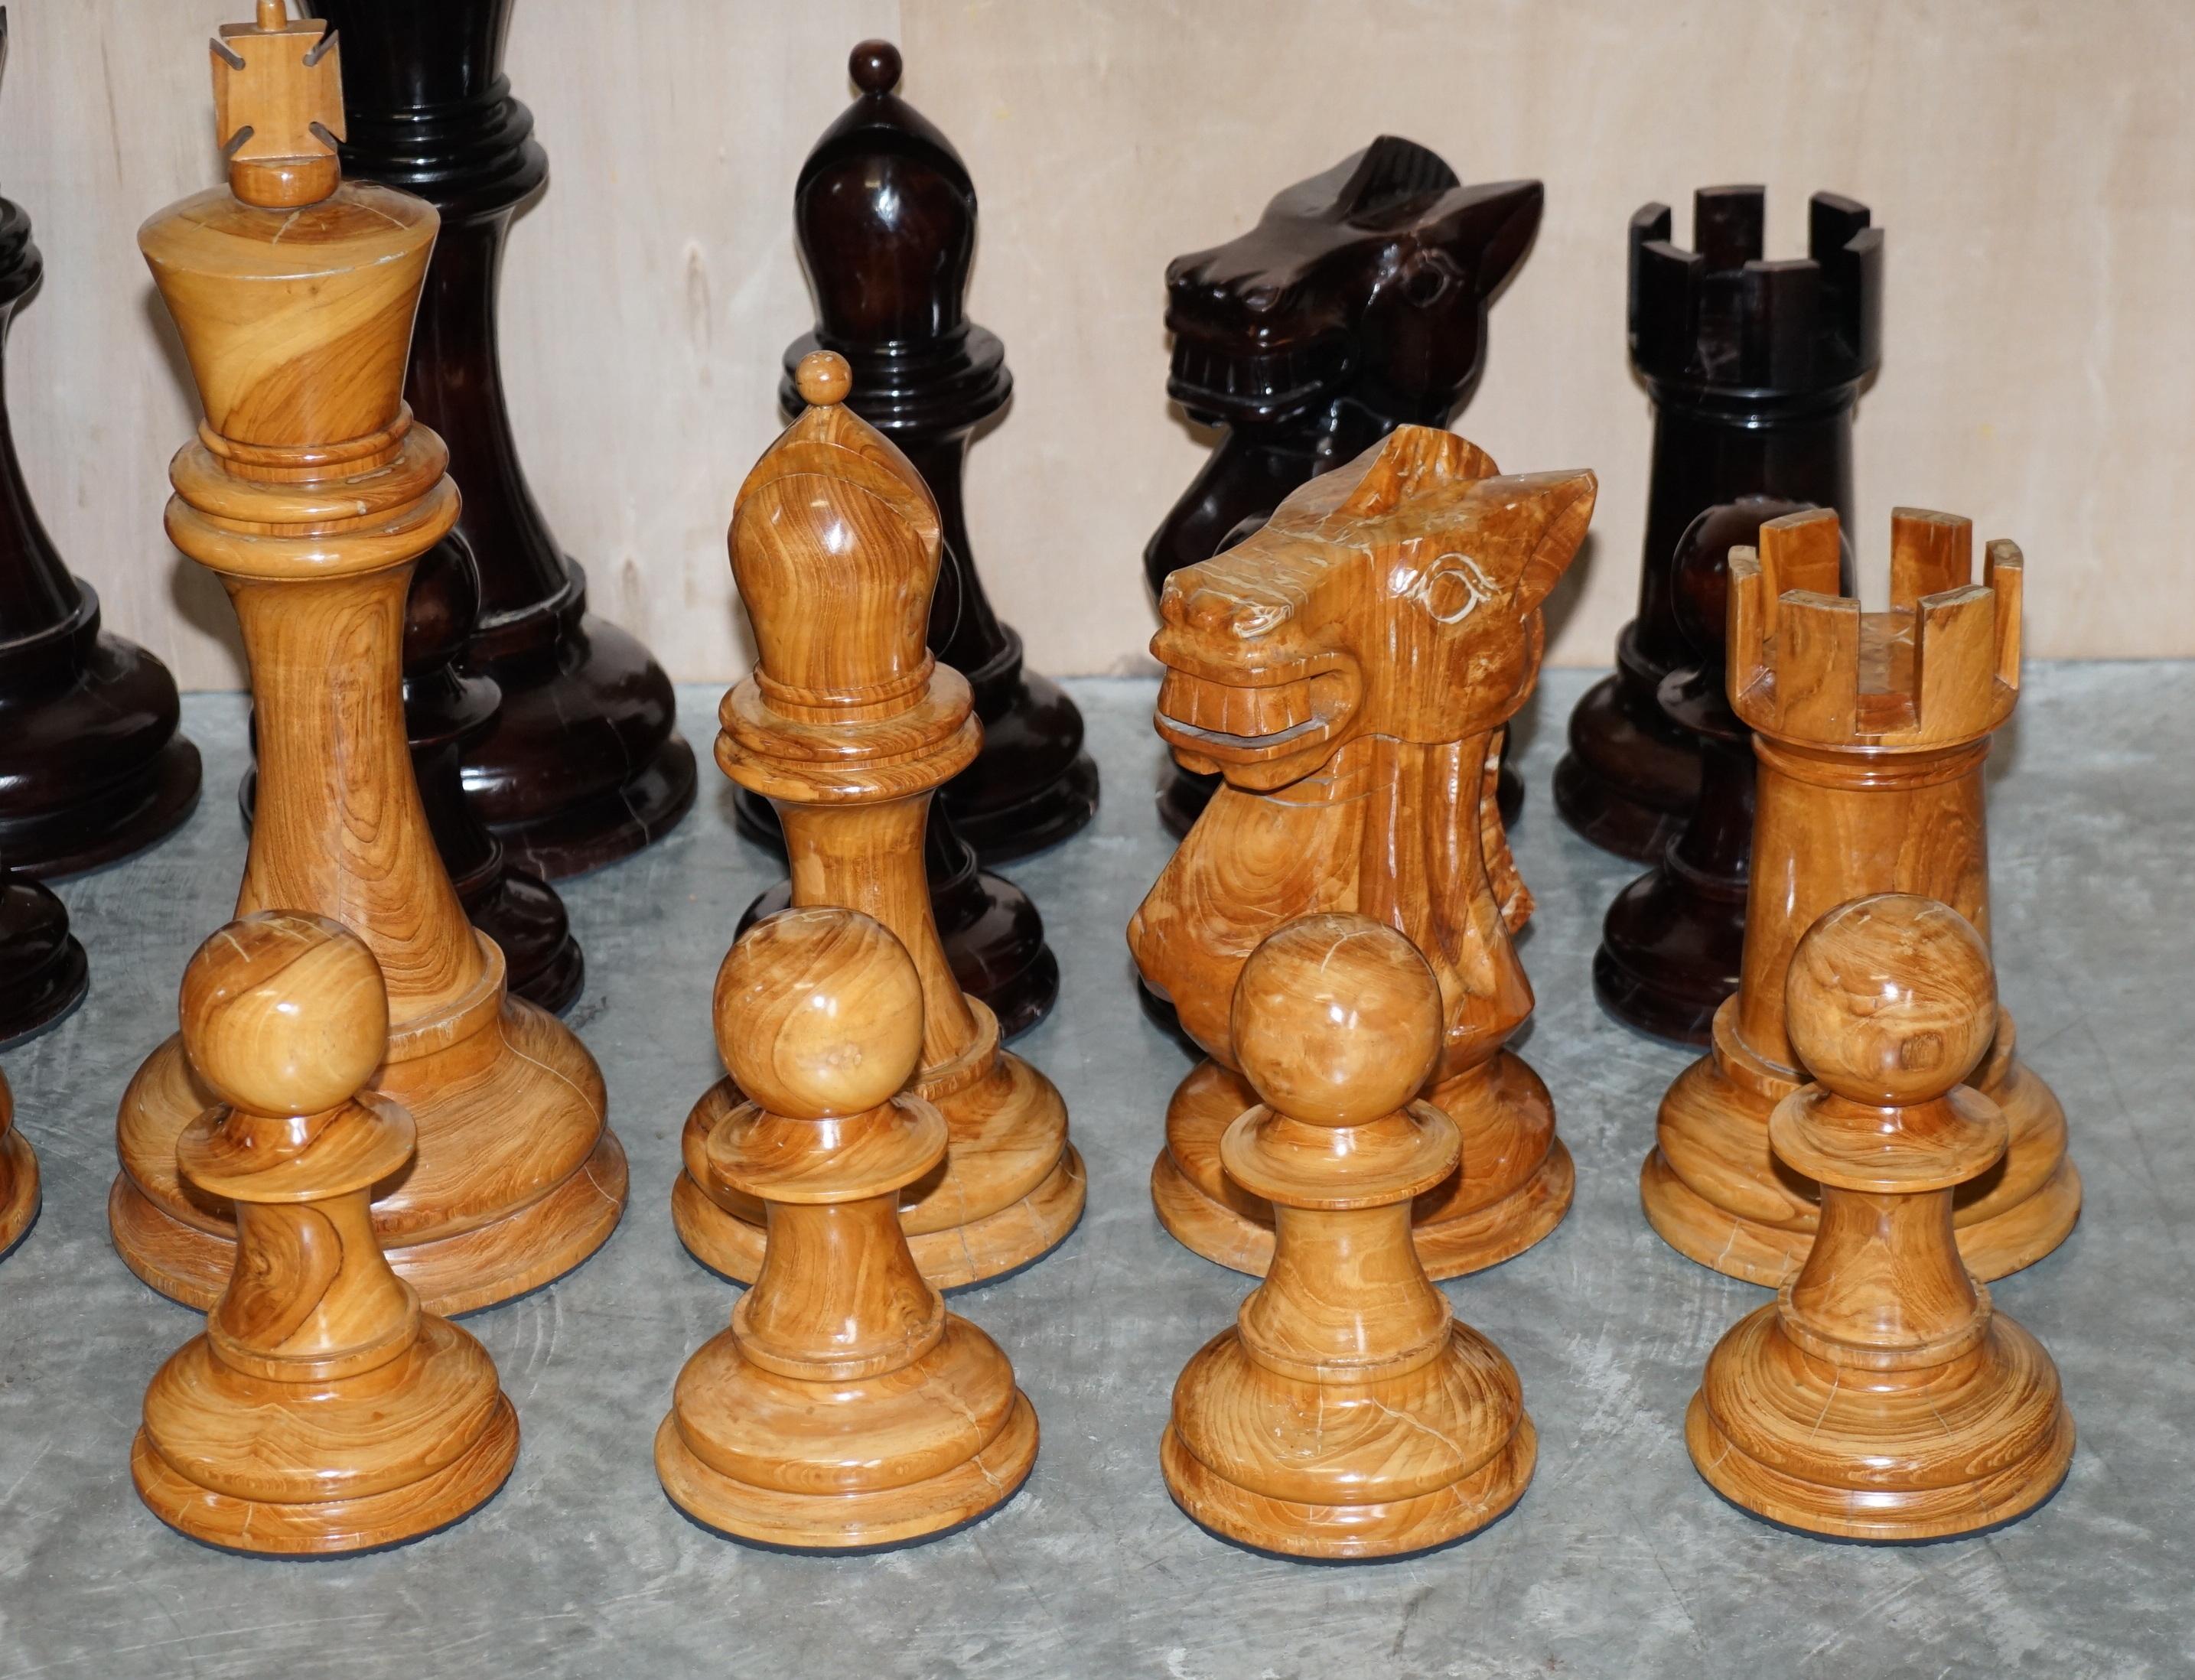 We are delighted to offer for sale this extremely well crafted Giant Chess Set in hand carved hardwood 

A truly stunning and exquisitely made set, the whites (which are actually brown) have a glorious timber patina, they look like pieces of art